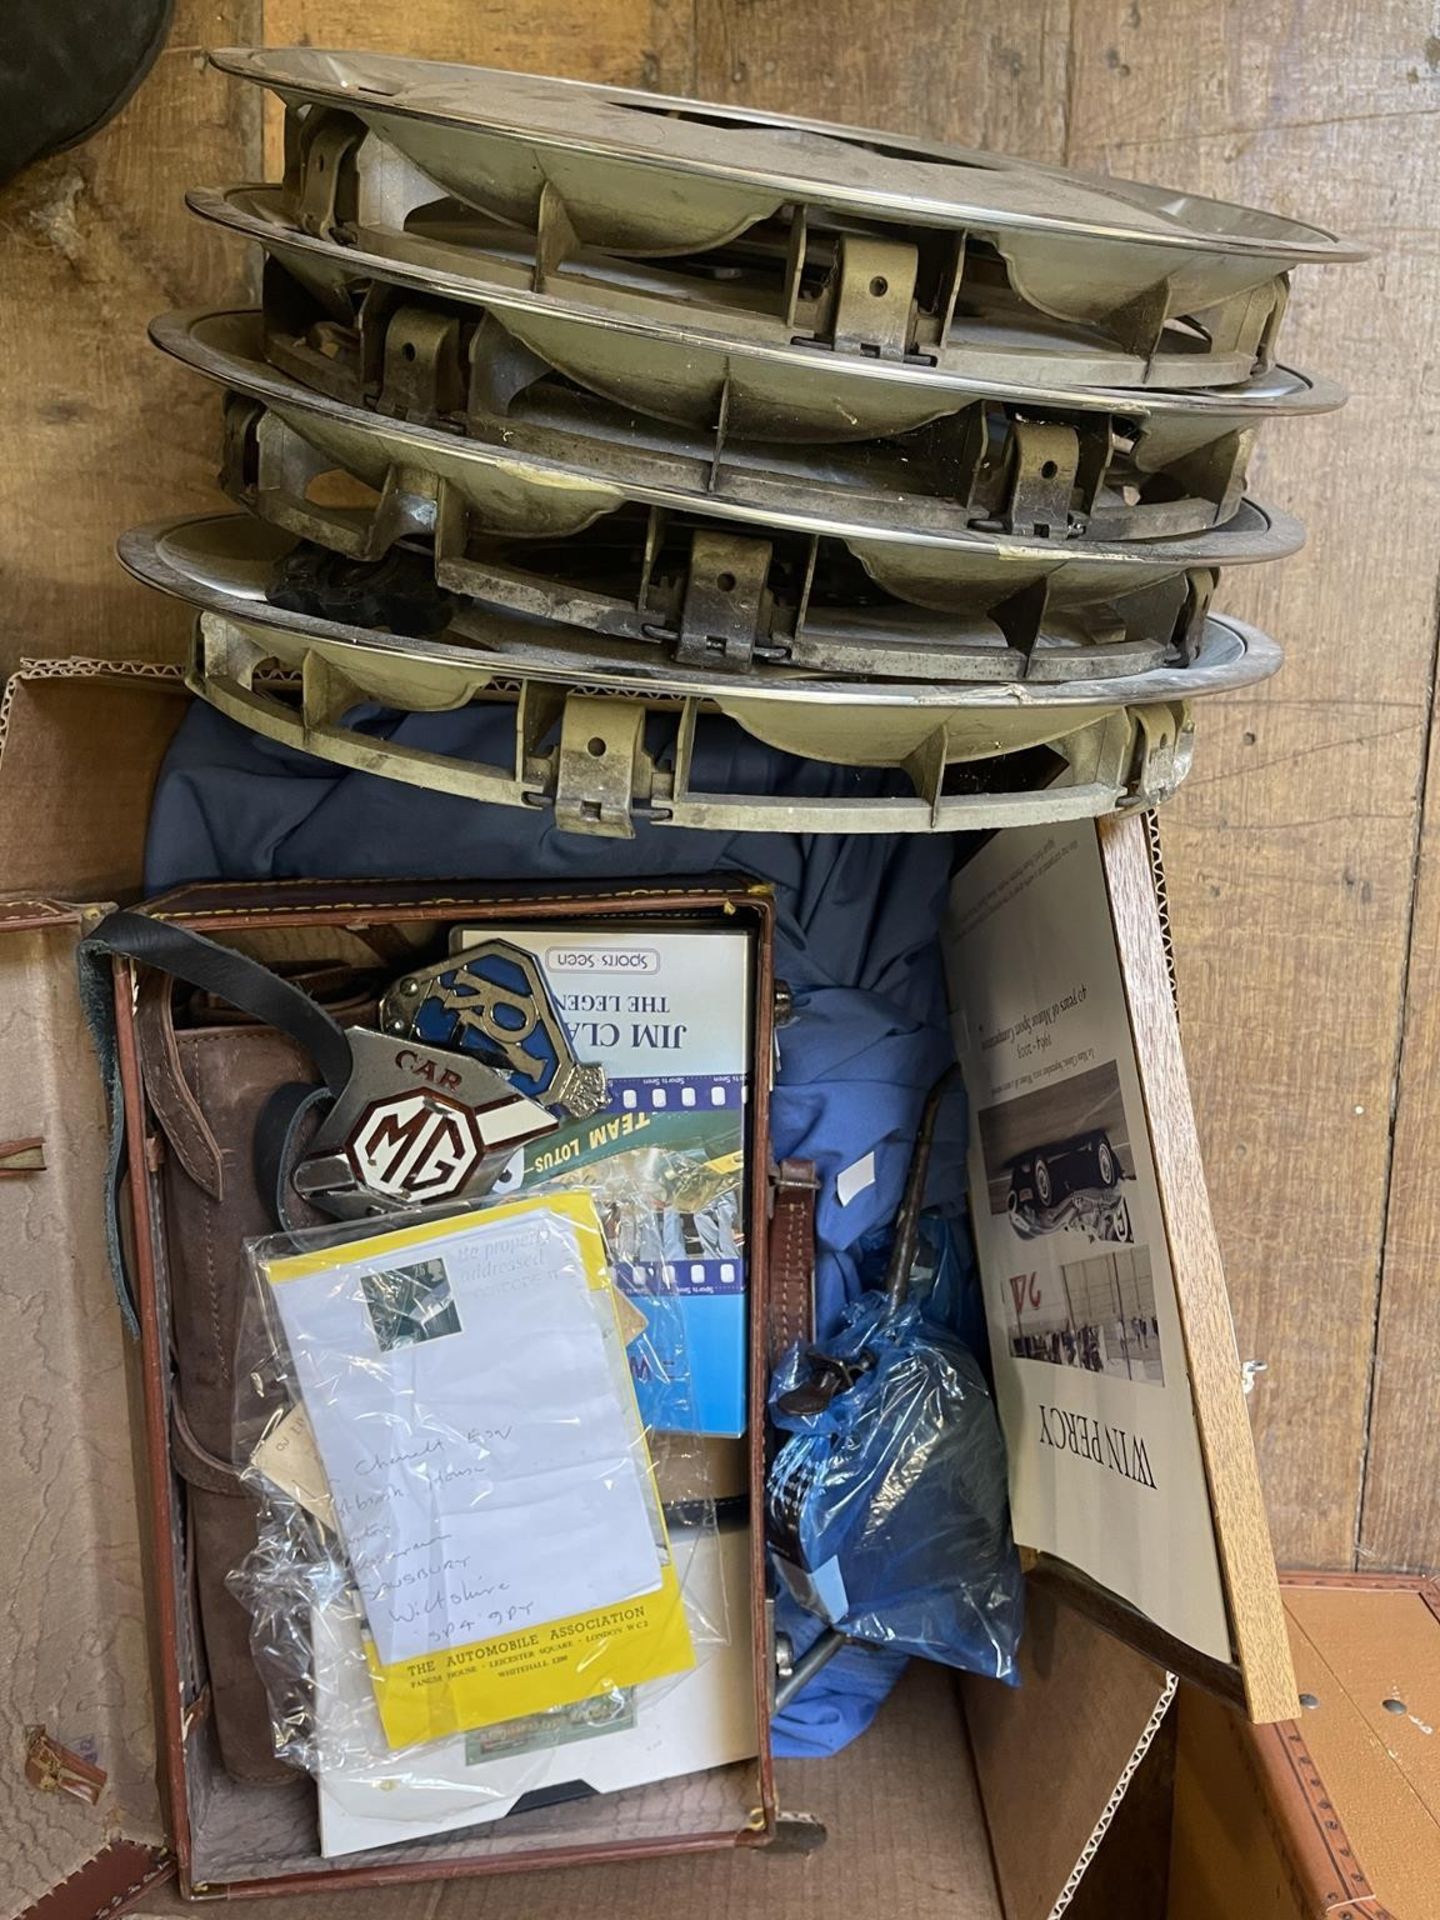 Assorted automobilia, including Win Percy - 40 Years of Motor Sport Competition, a Murray Walker